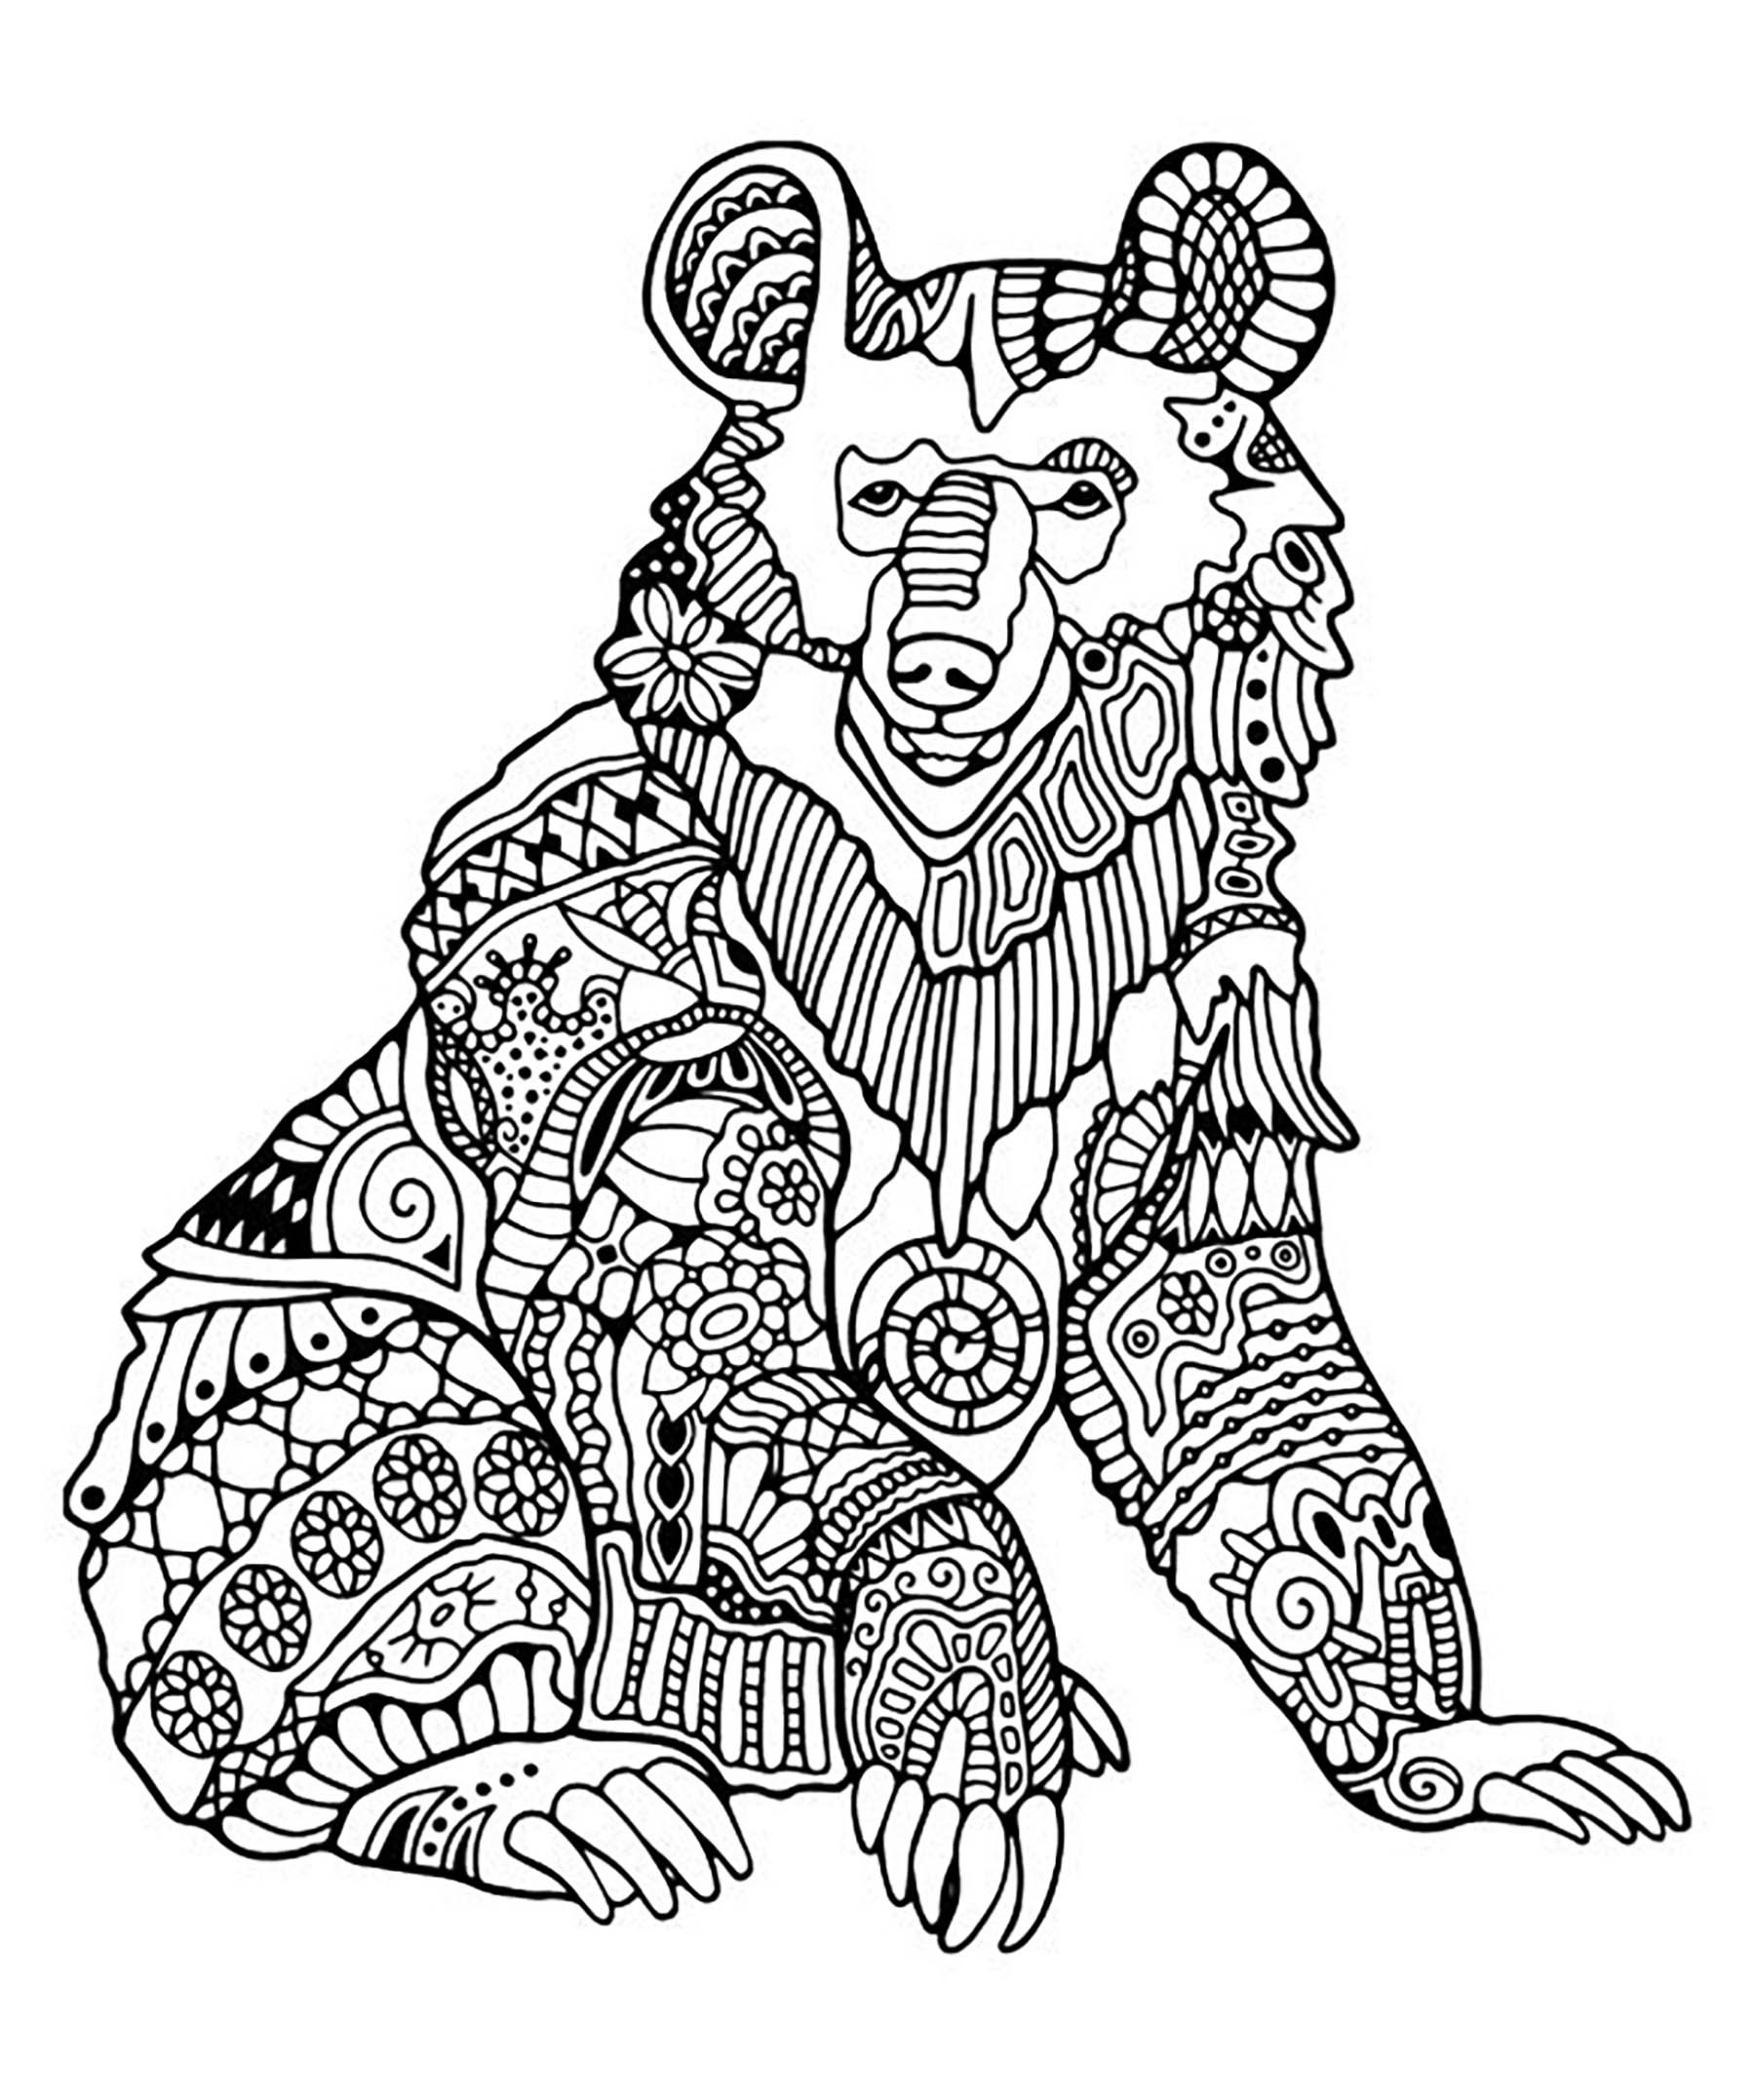 An Adult Coloring Pages Bear With Designs On It Outline Sketch